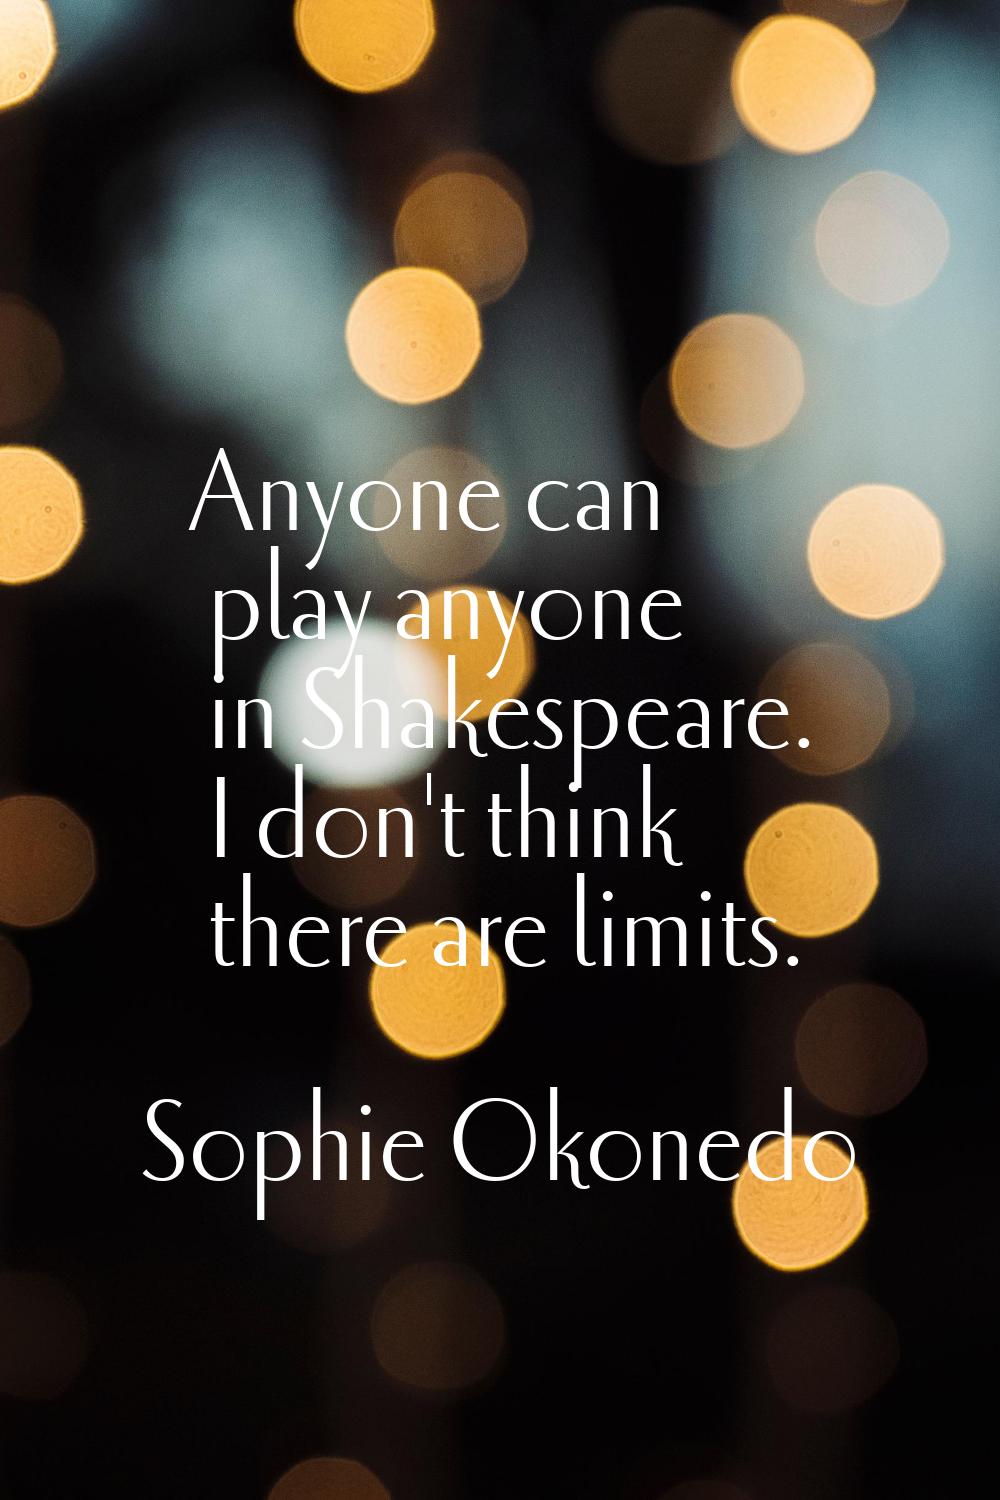 Anyone can play anyone in Shakespeare. I don't think there are limits.